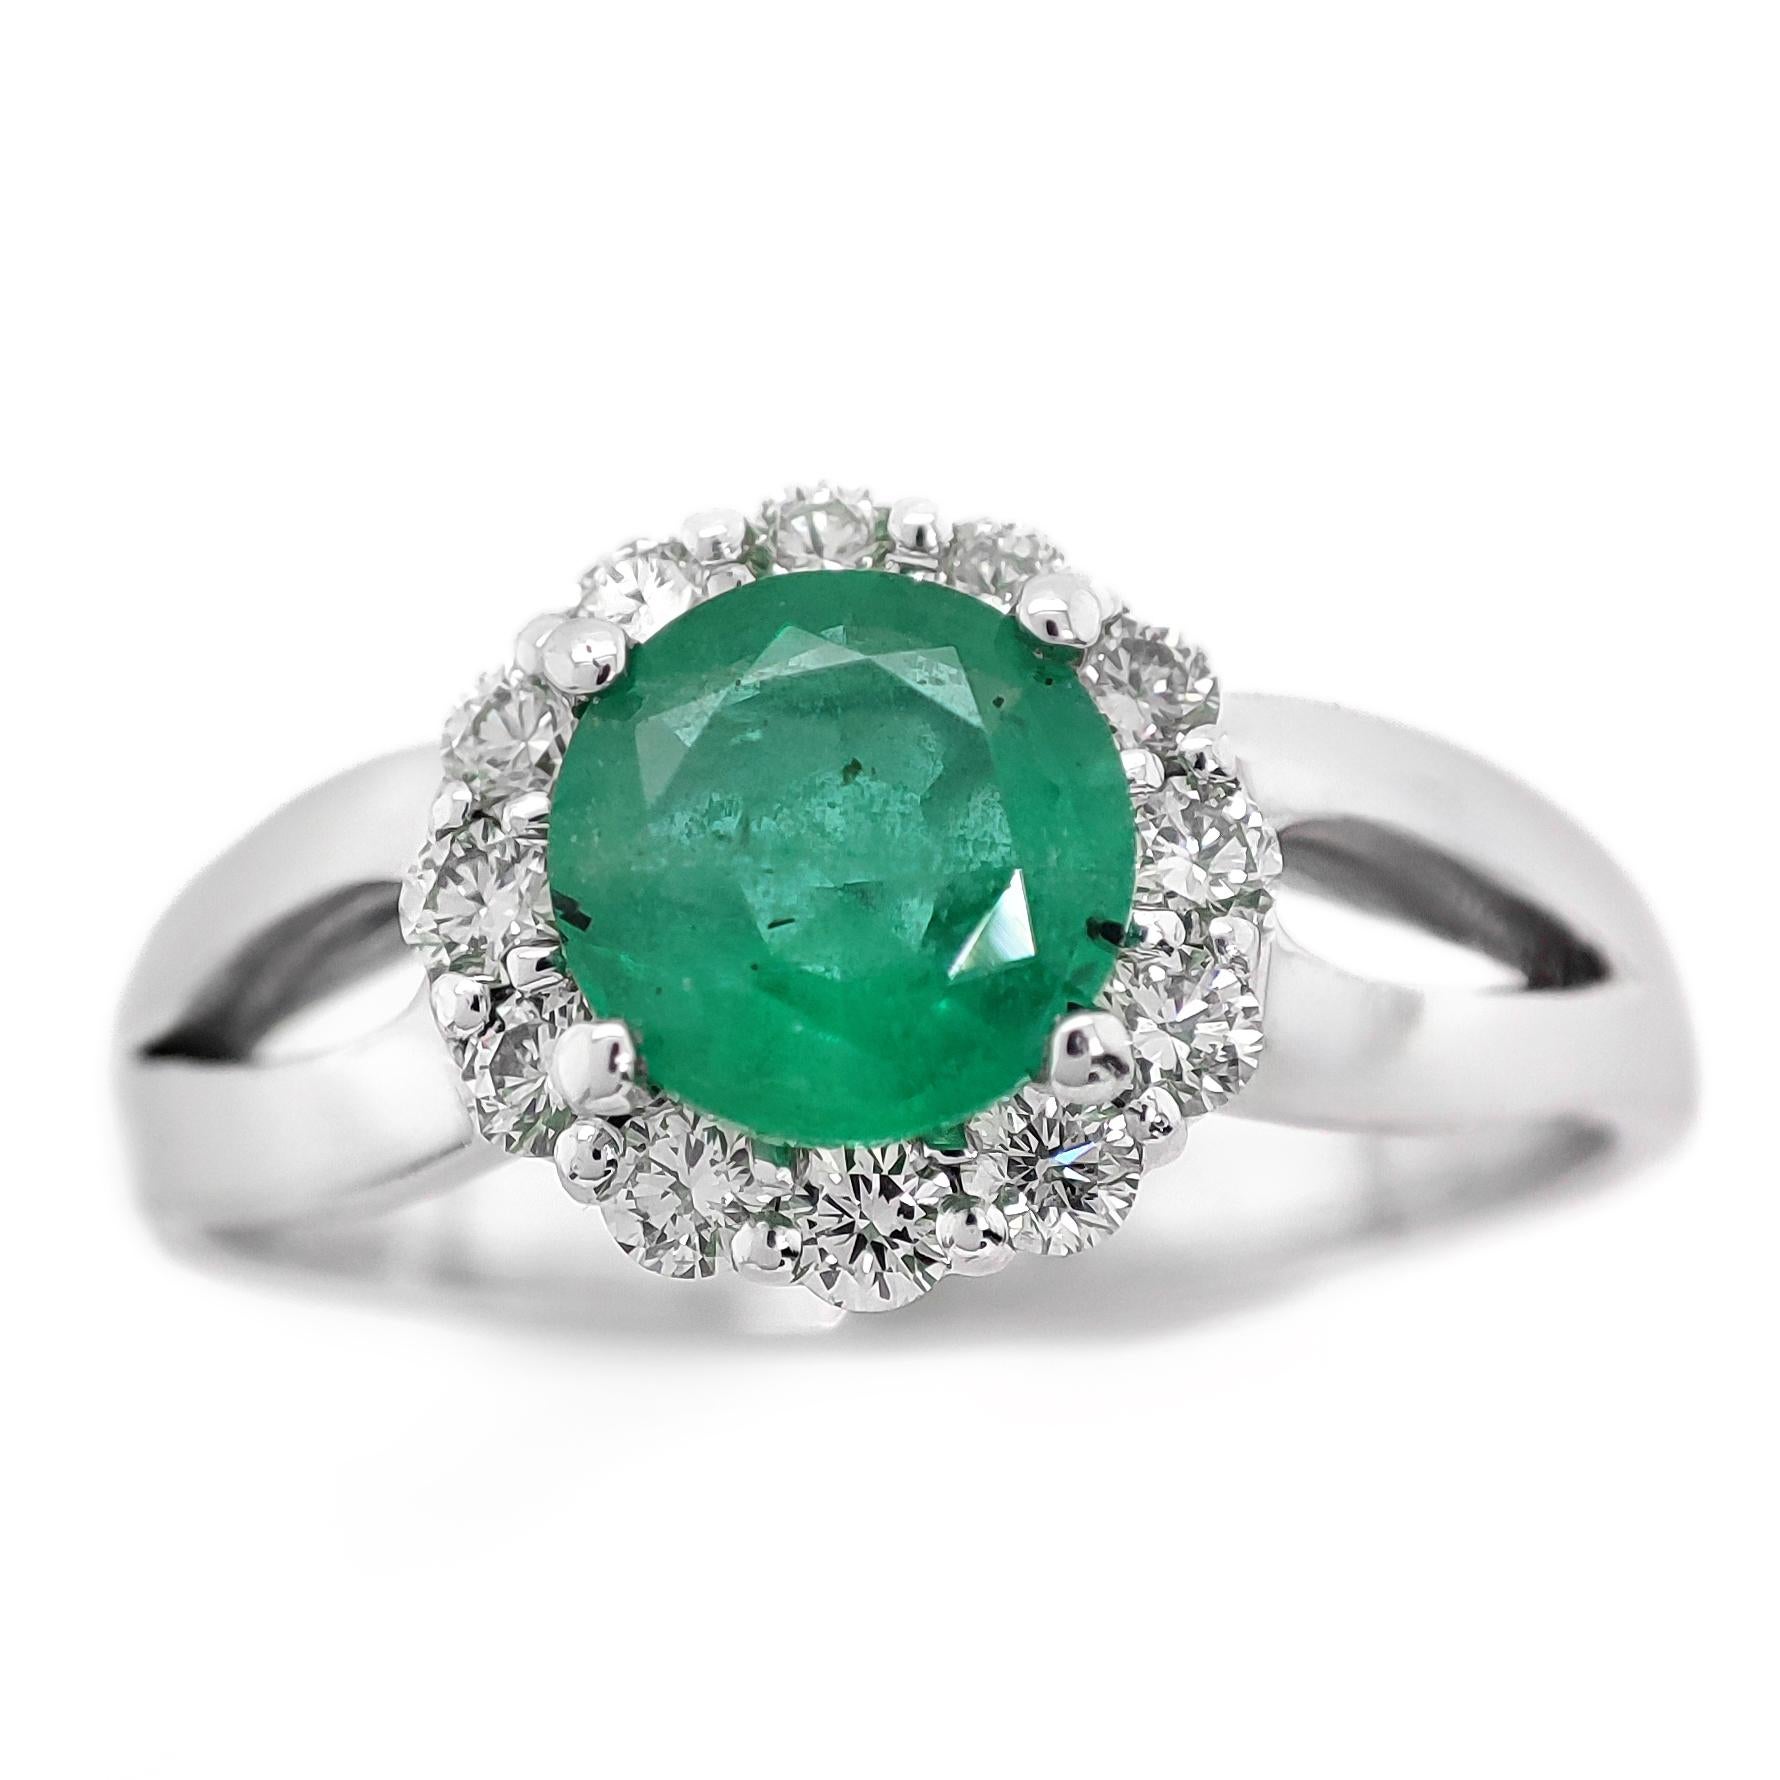 FOR US BUYER NO VAT

This exquisite ring features a 0.73 carat round green emerald at its center, displaying the captivating and vibrant green color that emeralds are cherished for.

Complementing the emerald's beauty are 12 diamonds, totaling 0.30